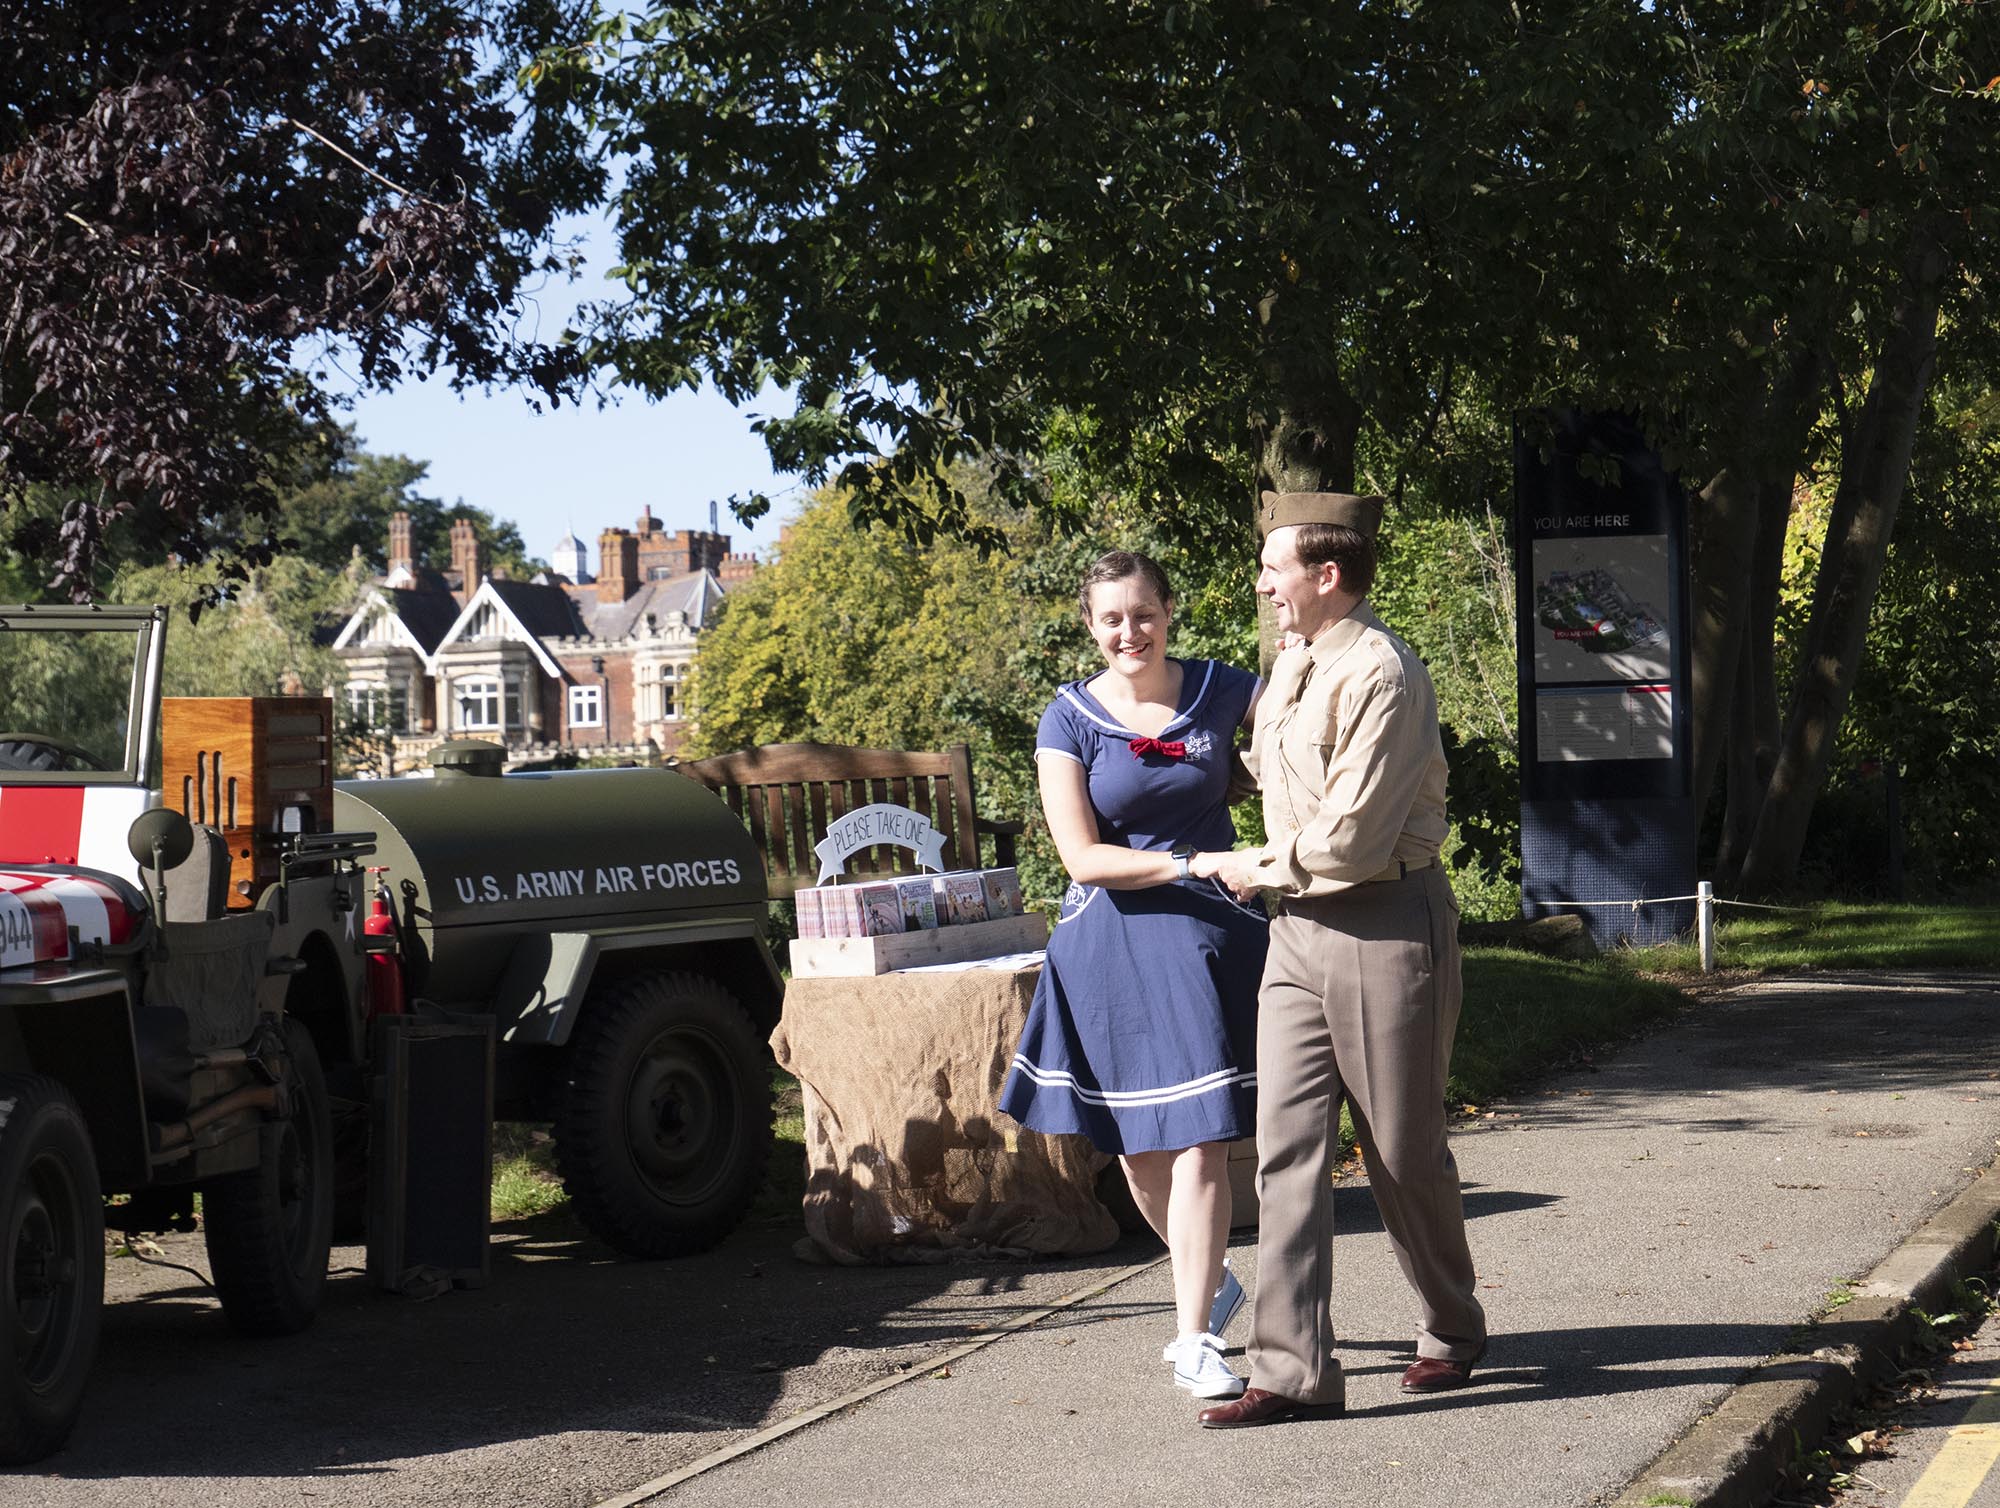 1940s Weekend at Bletchley Park